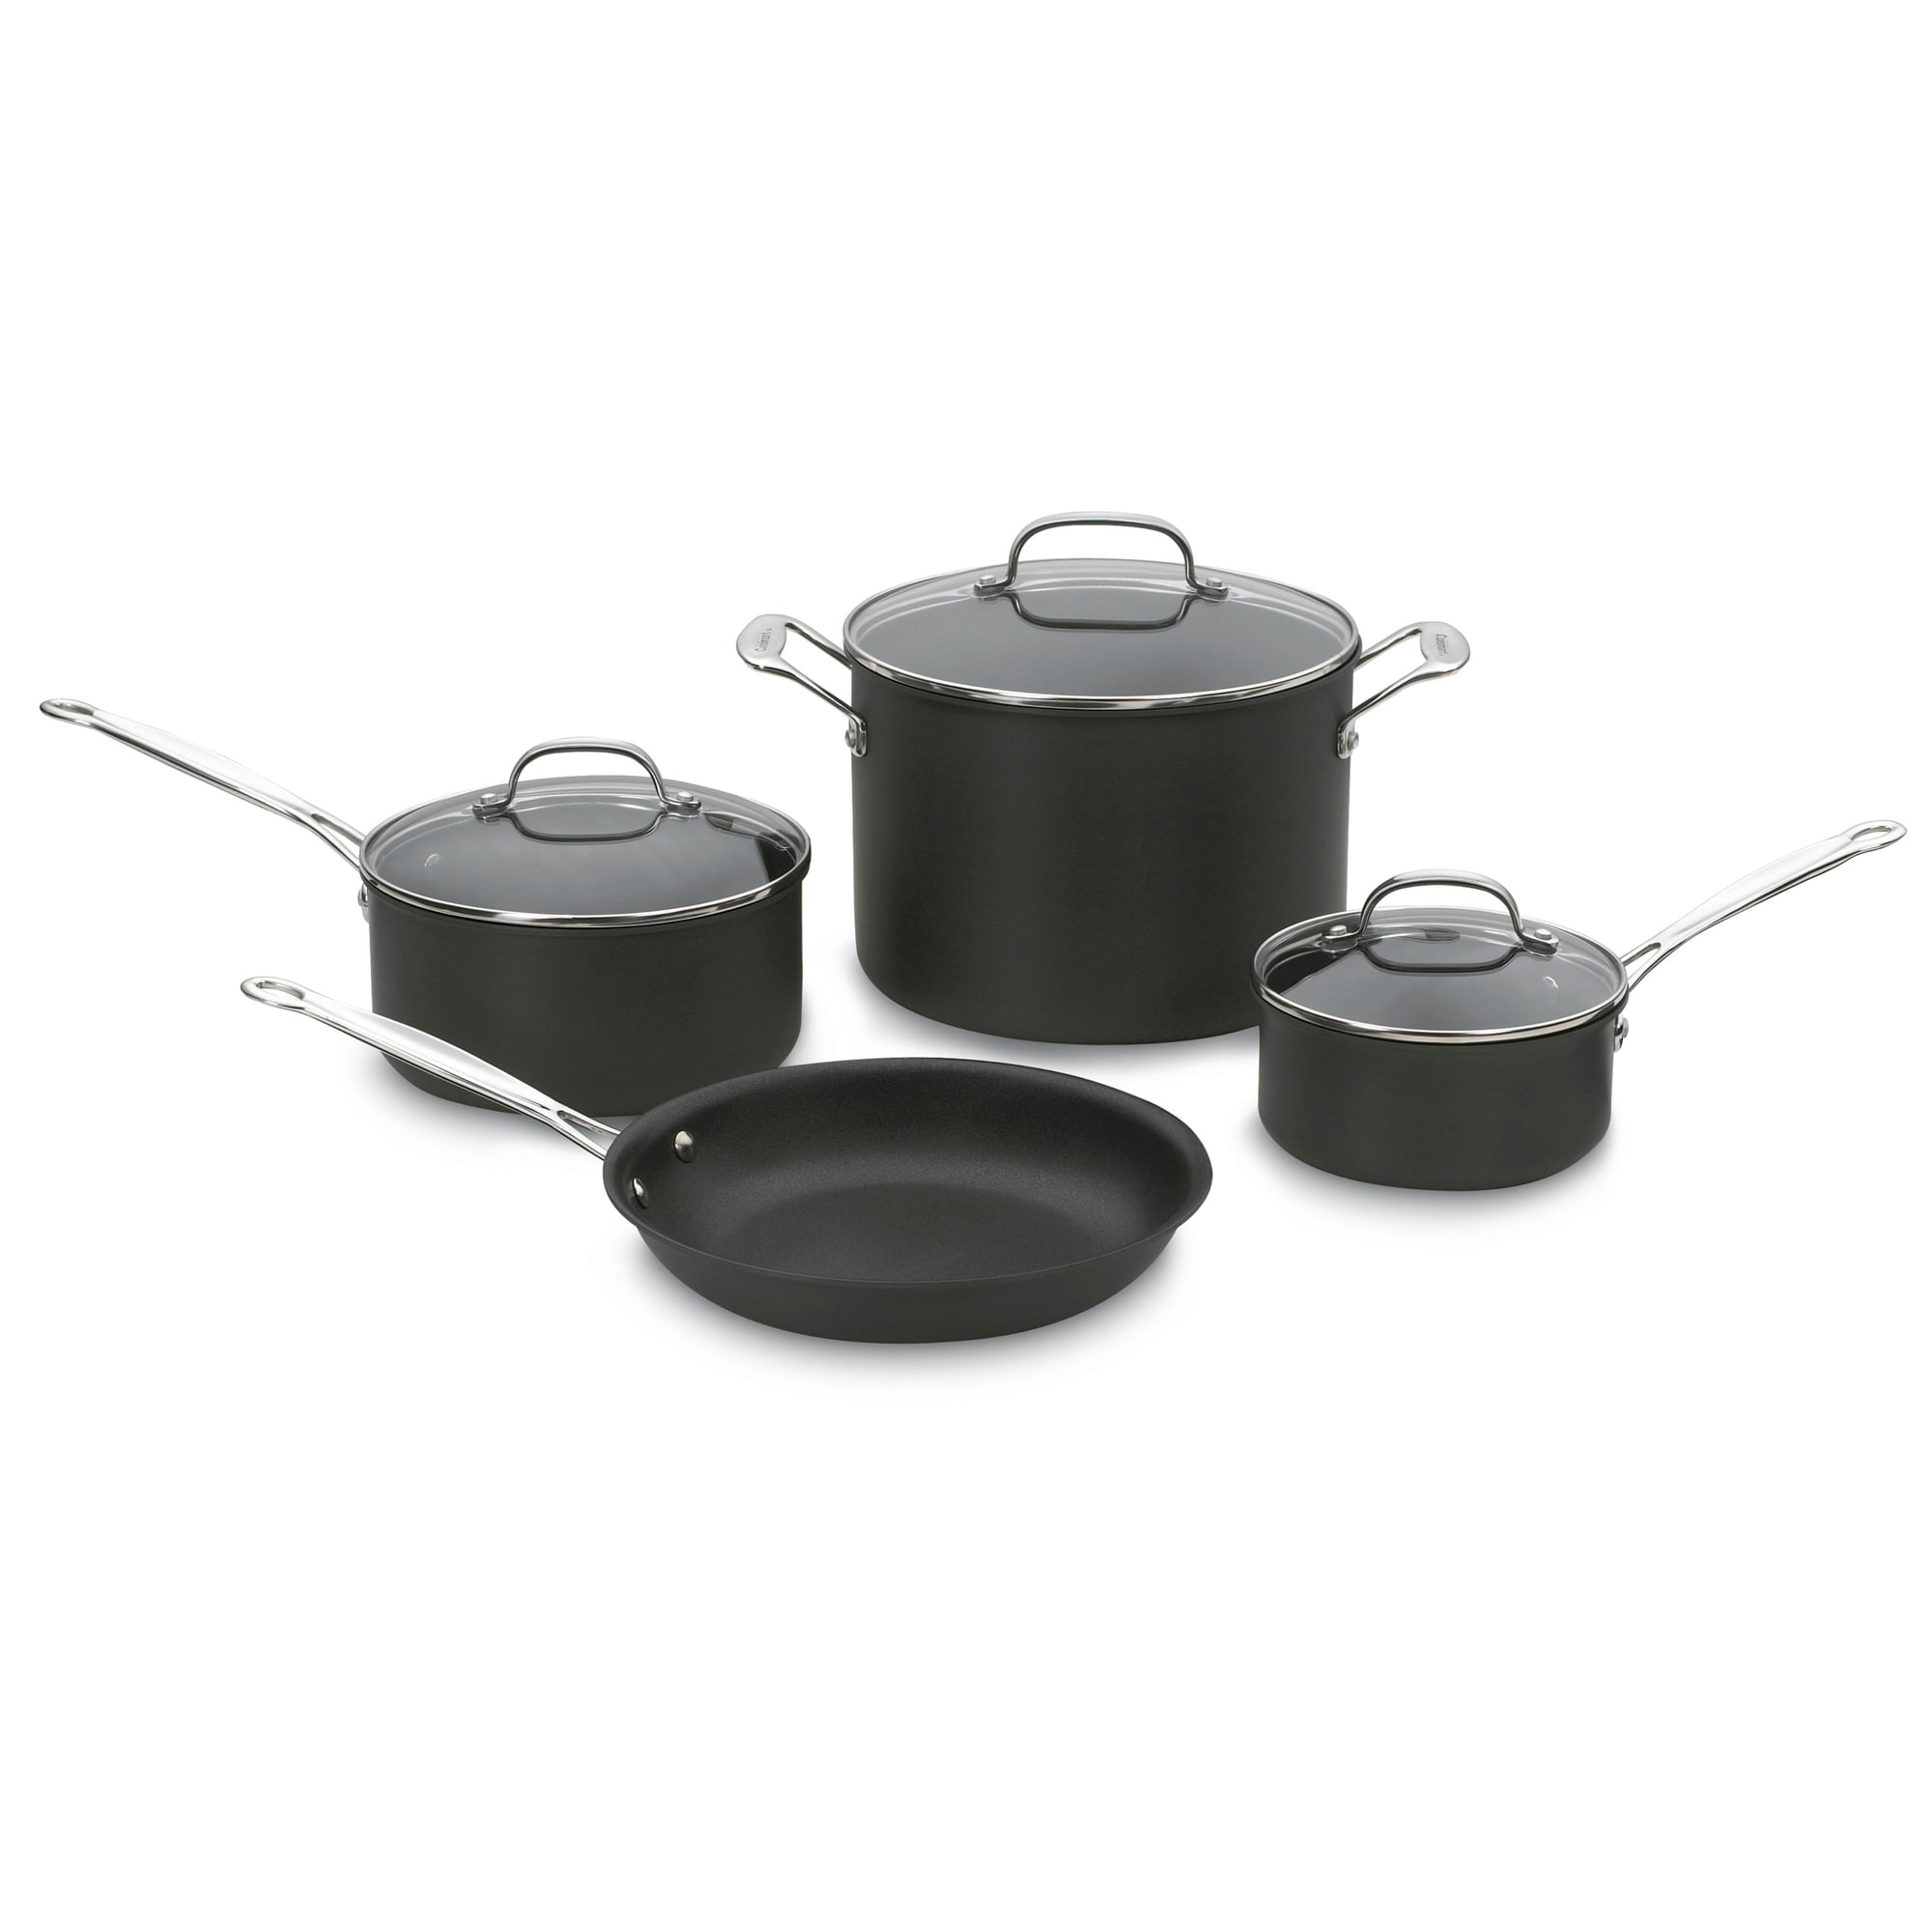 https://ak1.ostkcdn.com/images/products/is/images/direct/96fad90c4643555f70b2c3faab558e9aabd46758/Cuisinart-Chef%27s-Classic%E2%84%A2-Nonstick-Hard-Anodized-7-Piece-Set.jpg